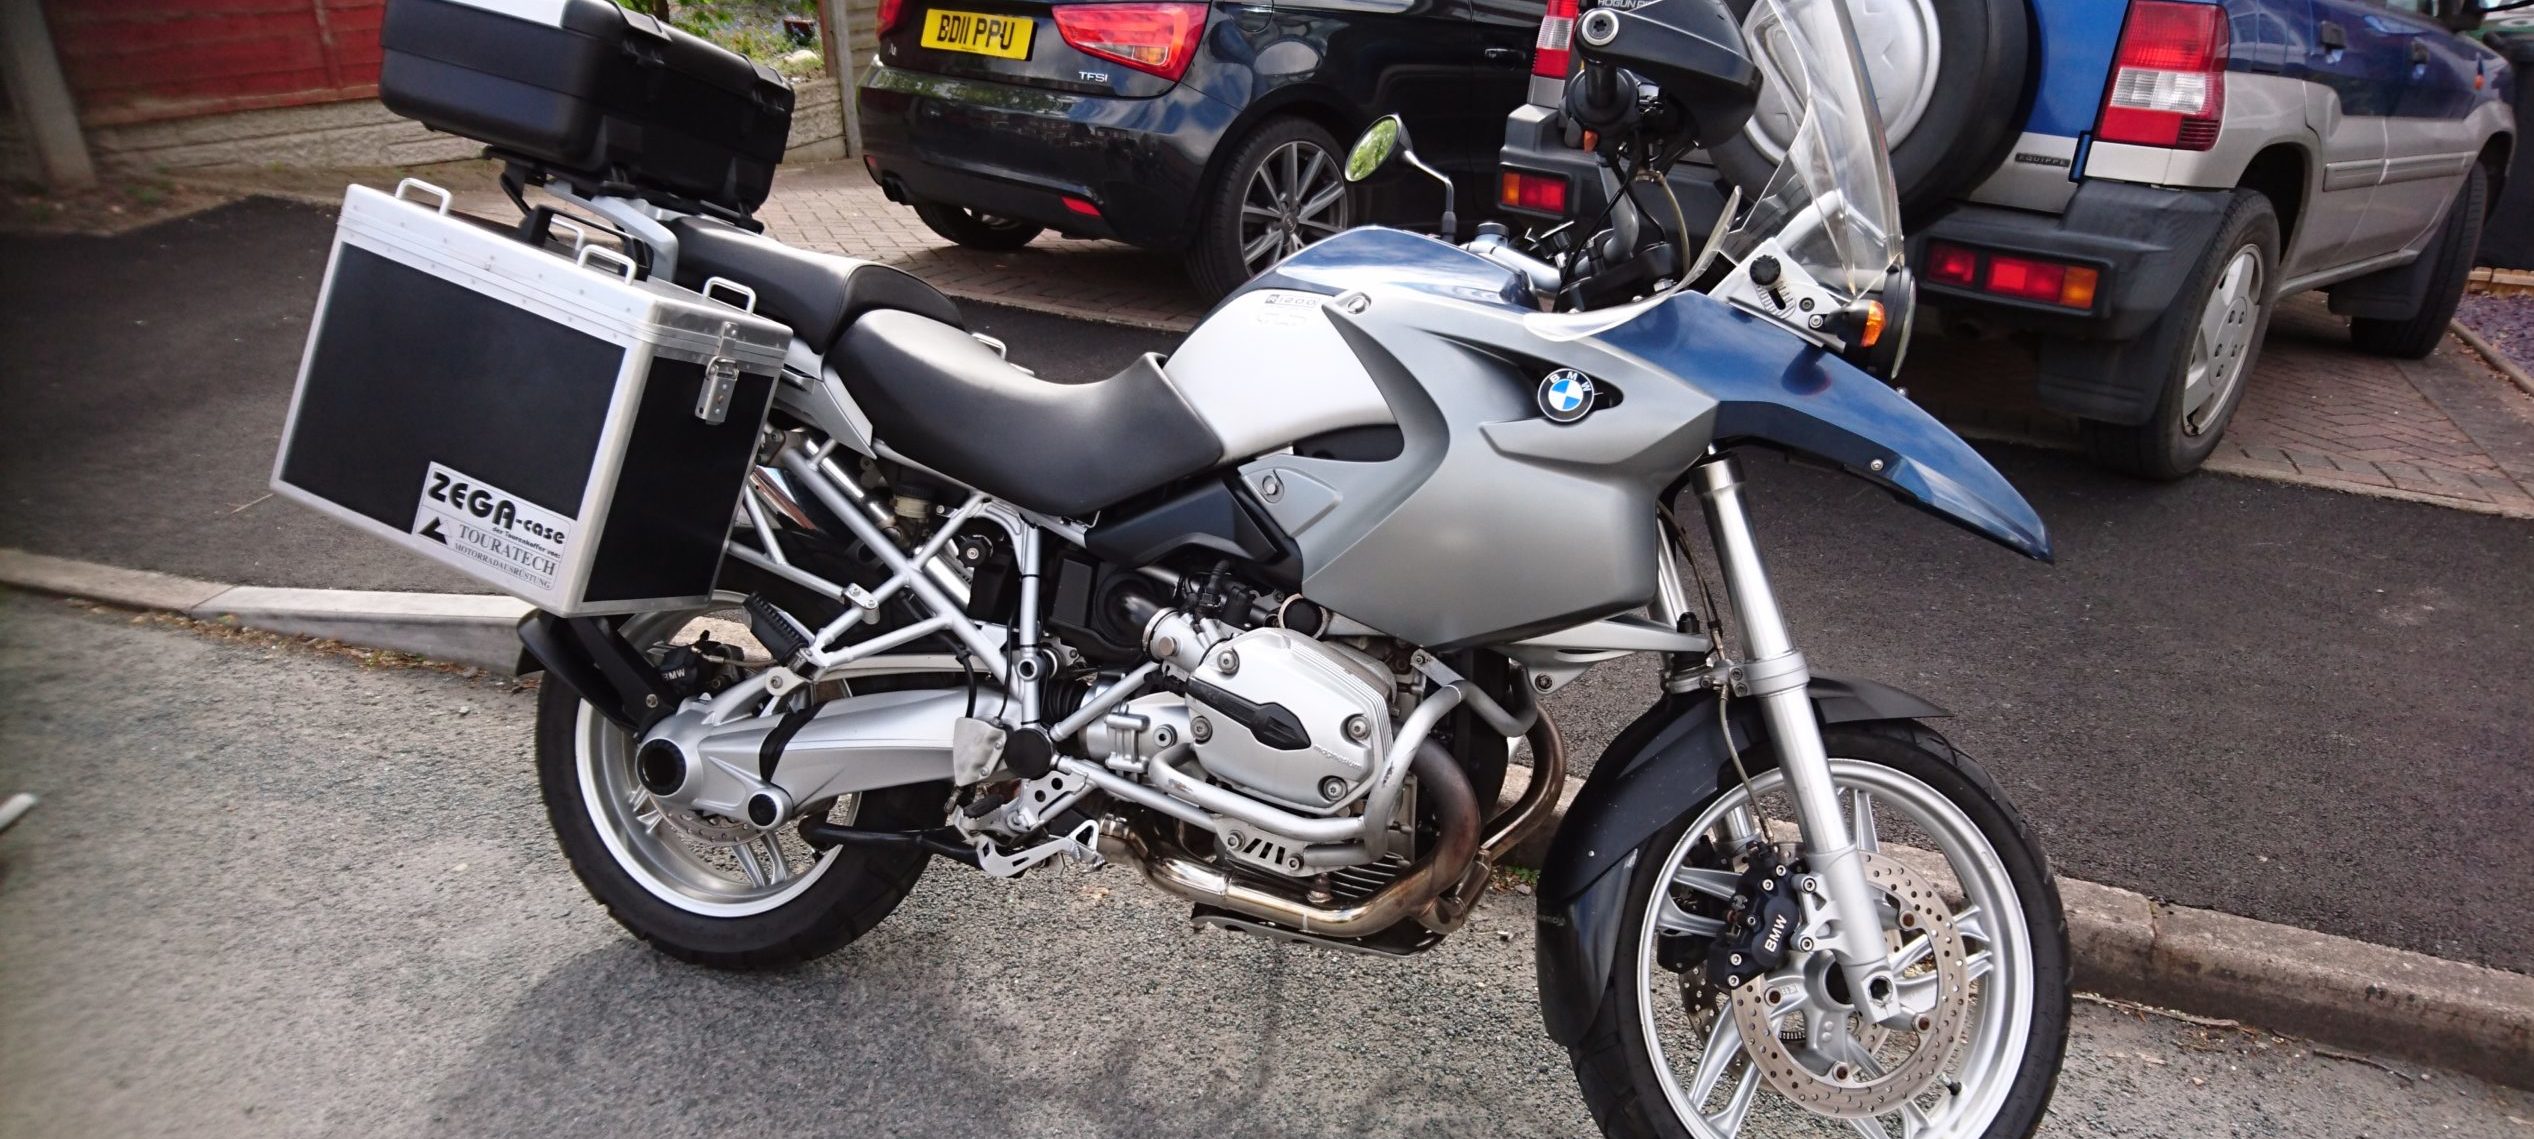 BMW R1200GS ready for European motorcycle tour 20 Countries in 20 Days